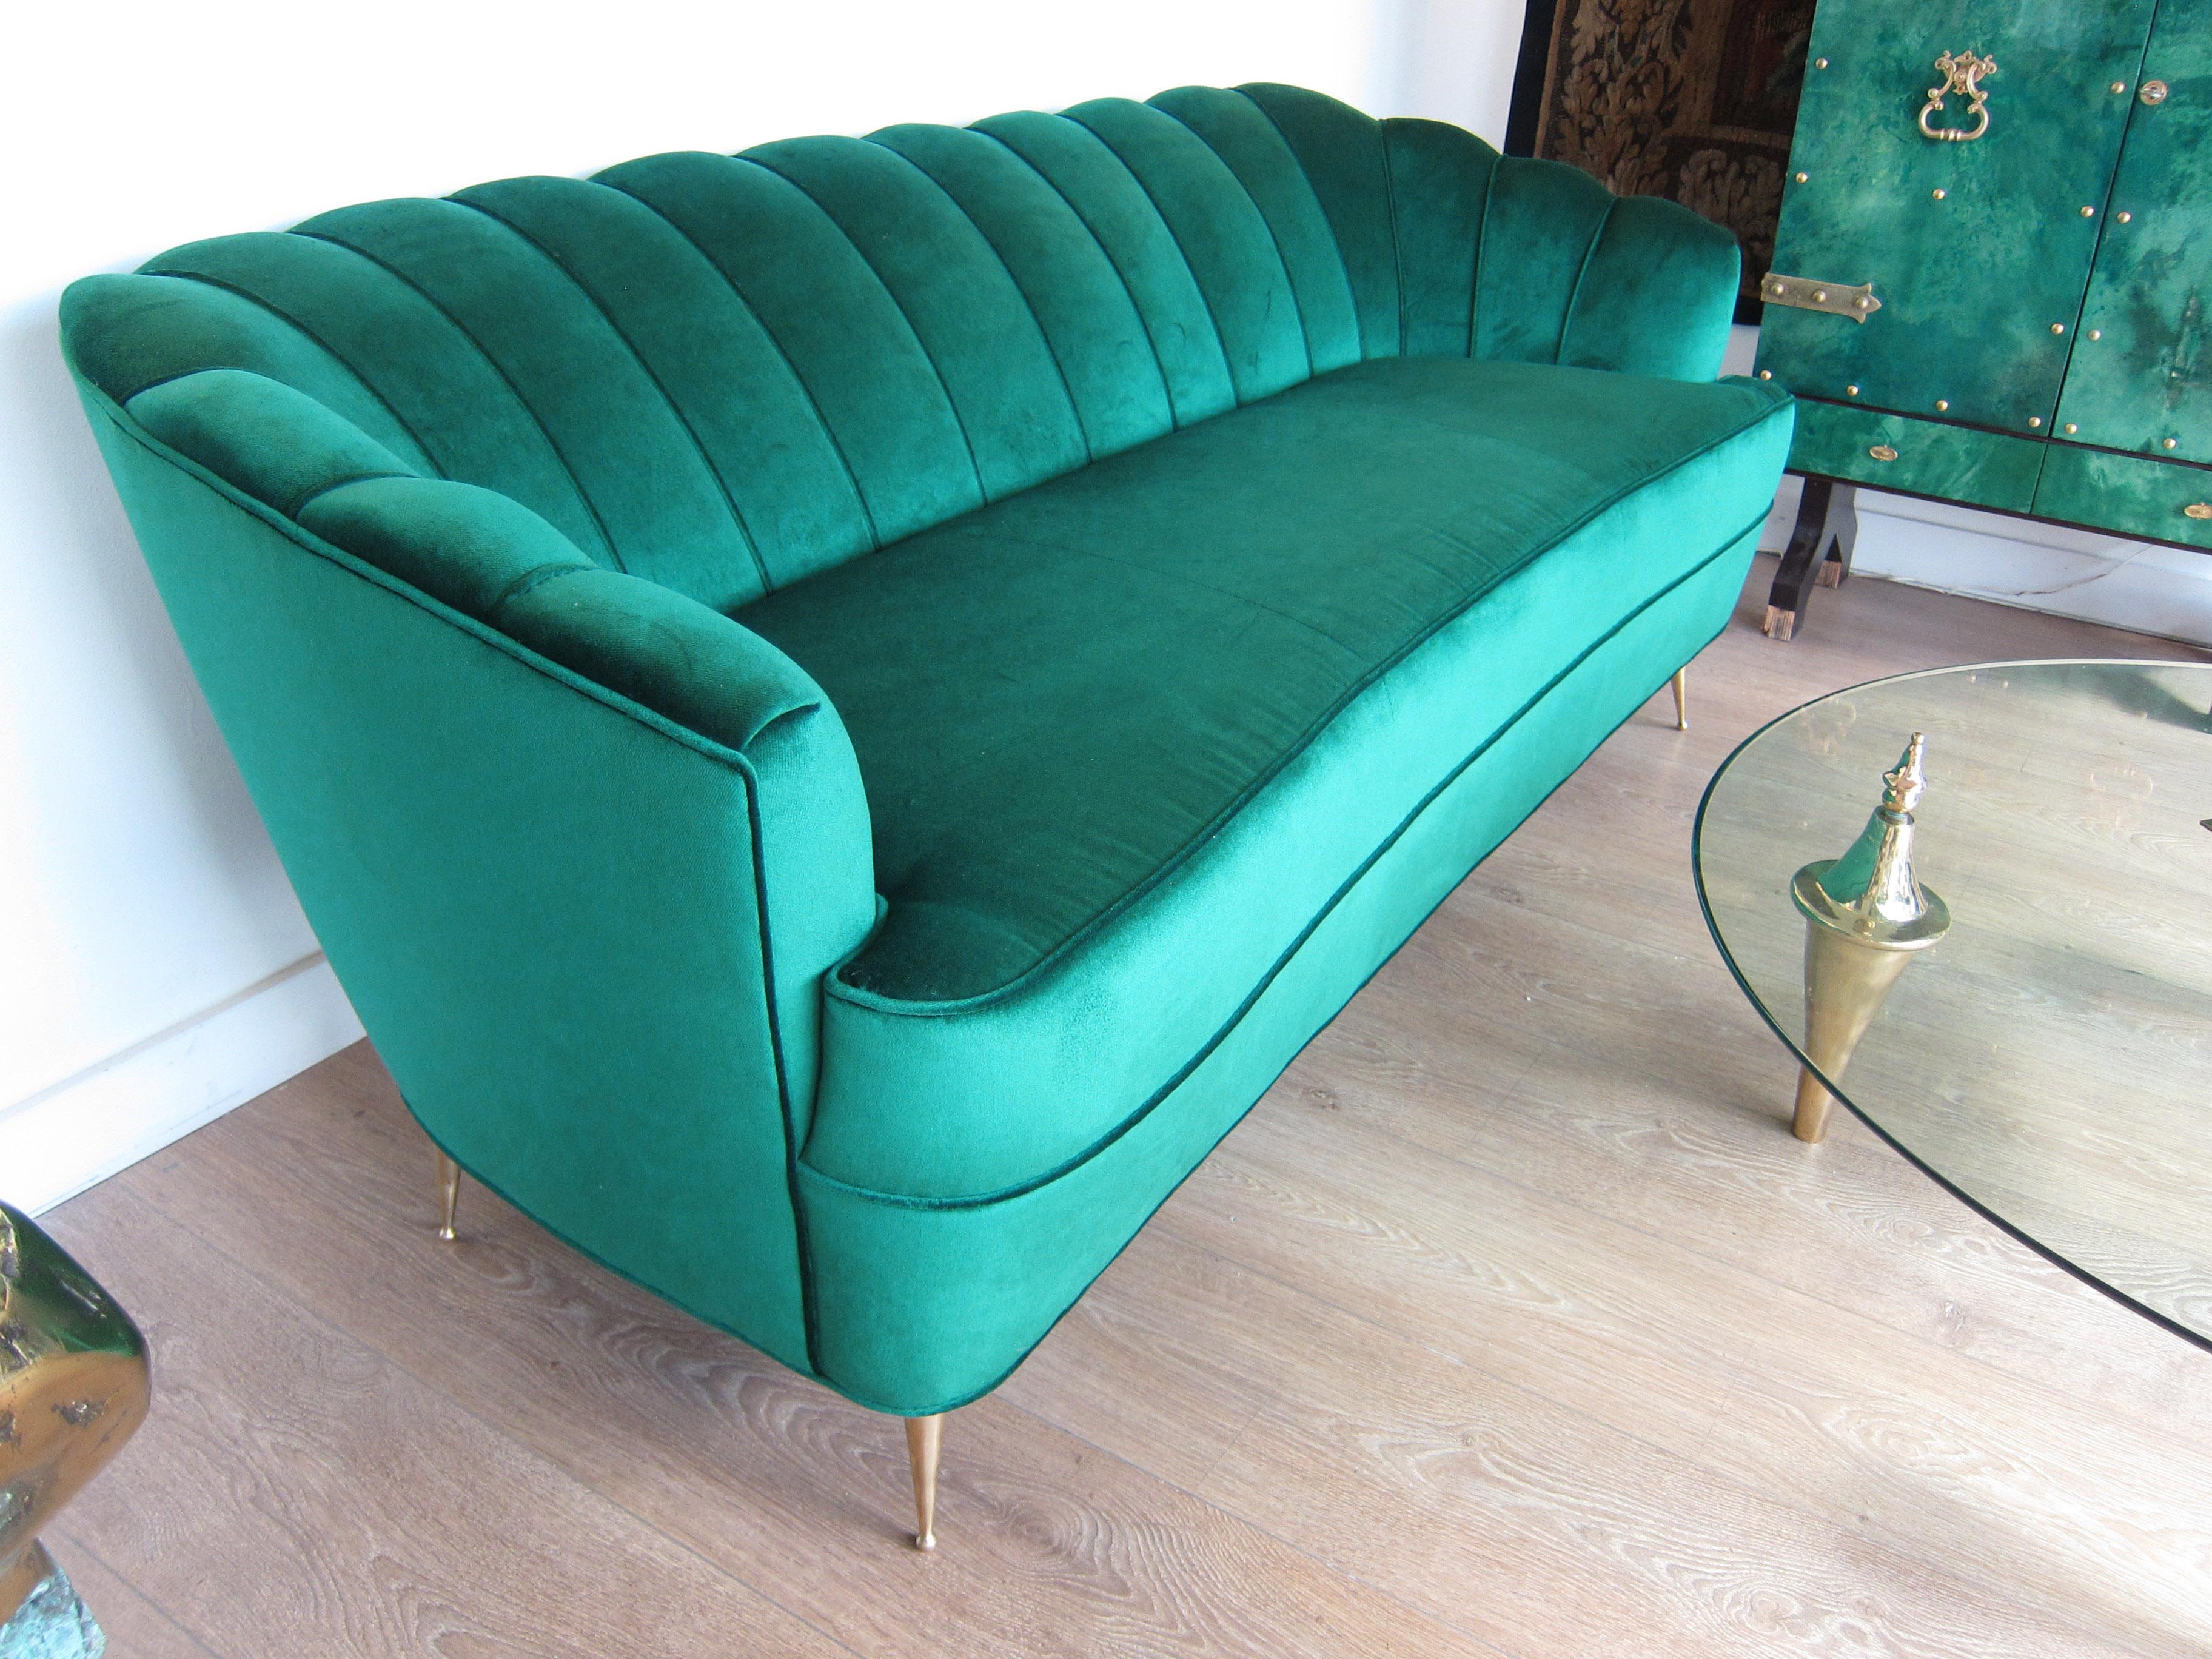 Italian Mid-Century Modern settee with scalloped back and brass legs. 
Newly upholstered with emerald green velvet, 
Attributed to Ico Parisi.
Located in our store in Miami ready for shipping.